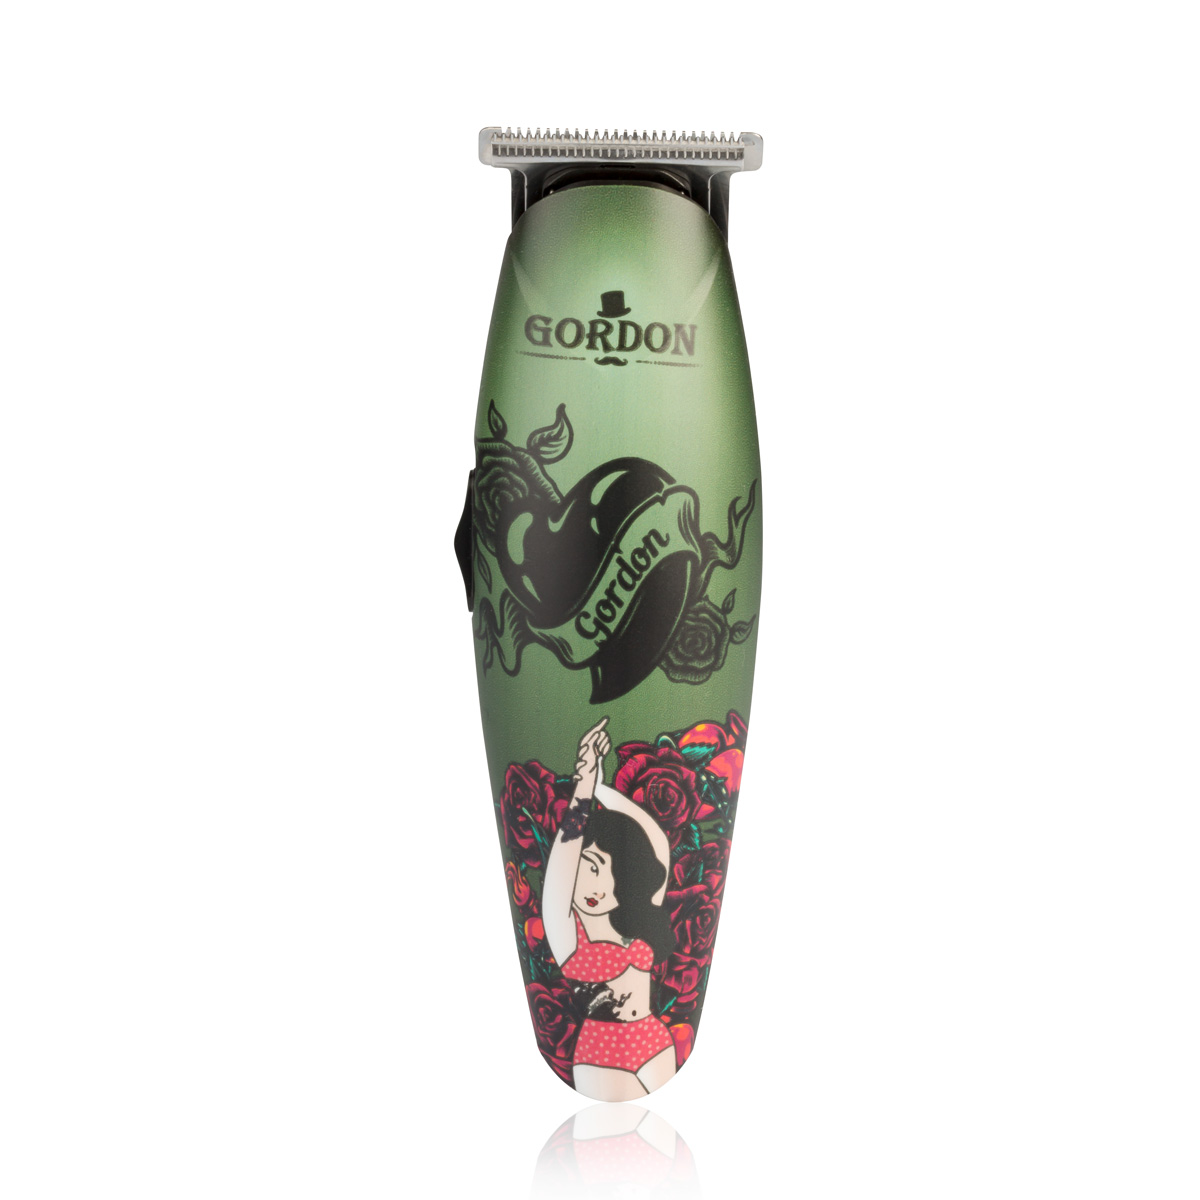 Trimmer μαλλιών Gordon Roses Limited Edition.